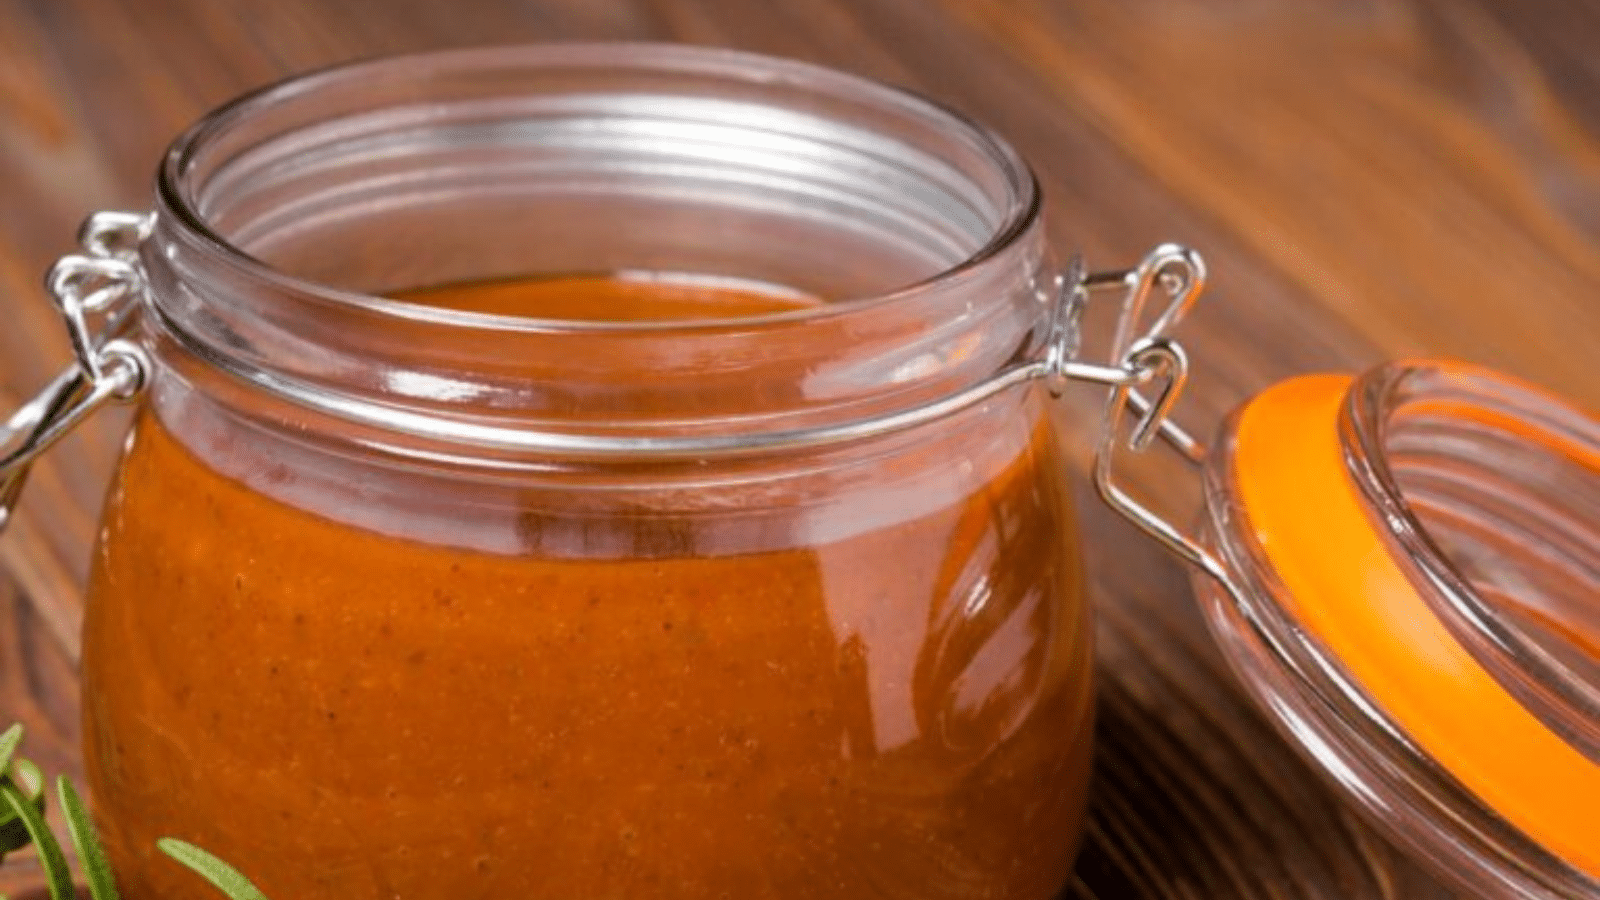 Pineapple BBQ sauce in jar with lid open